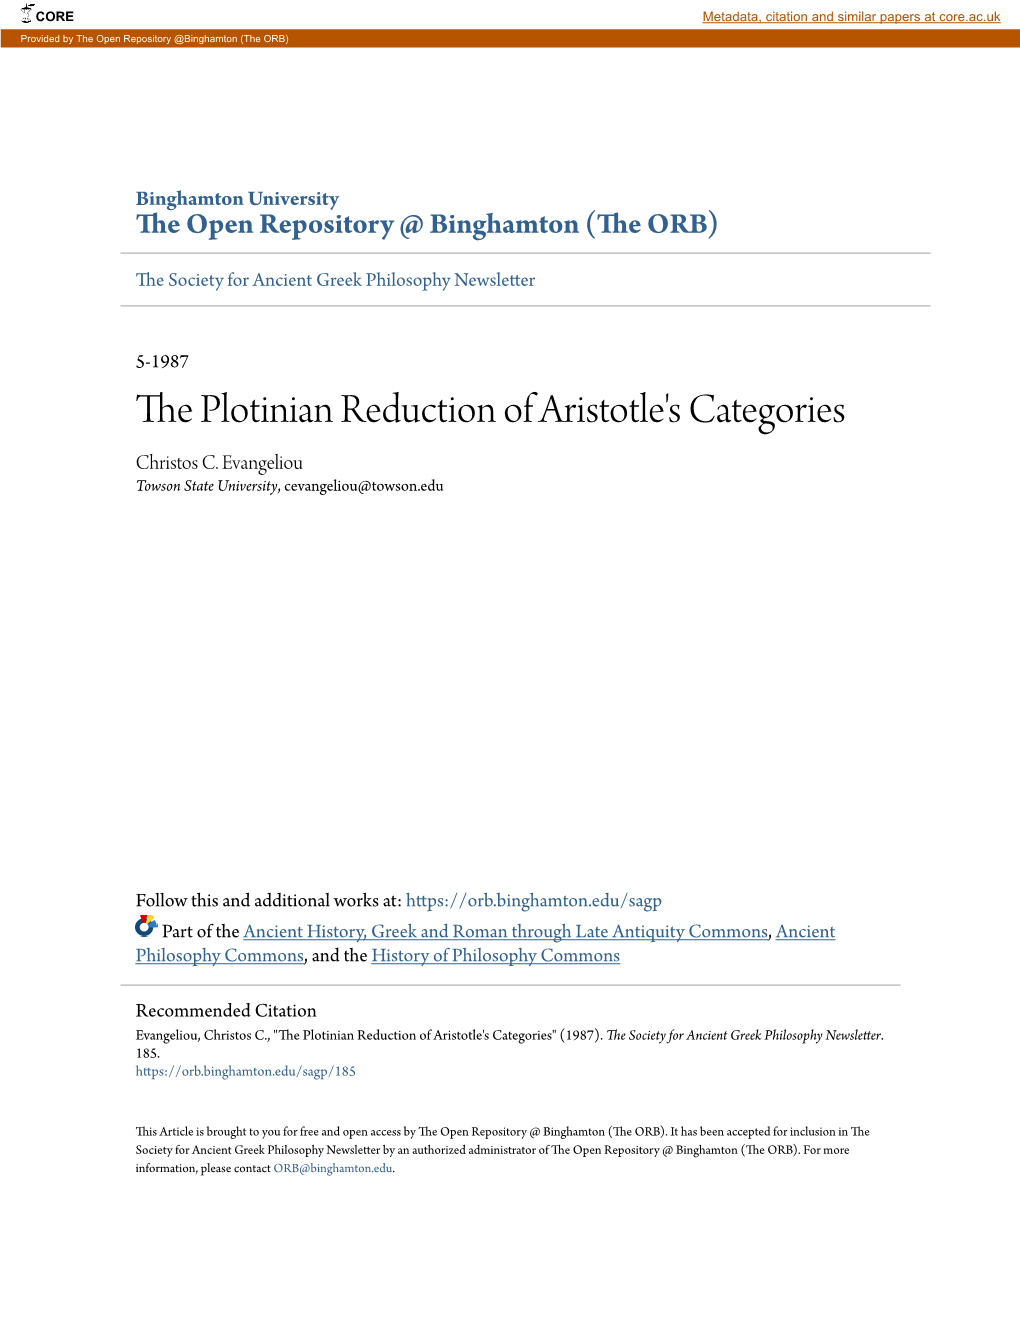 The Plotinian Reduction of Aristotle's Categories